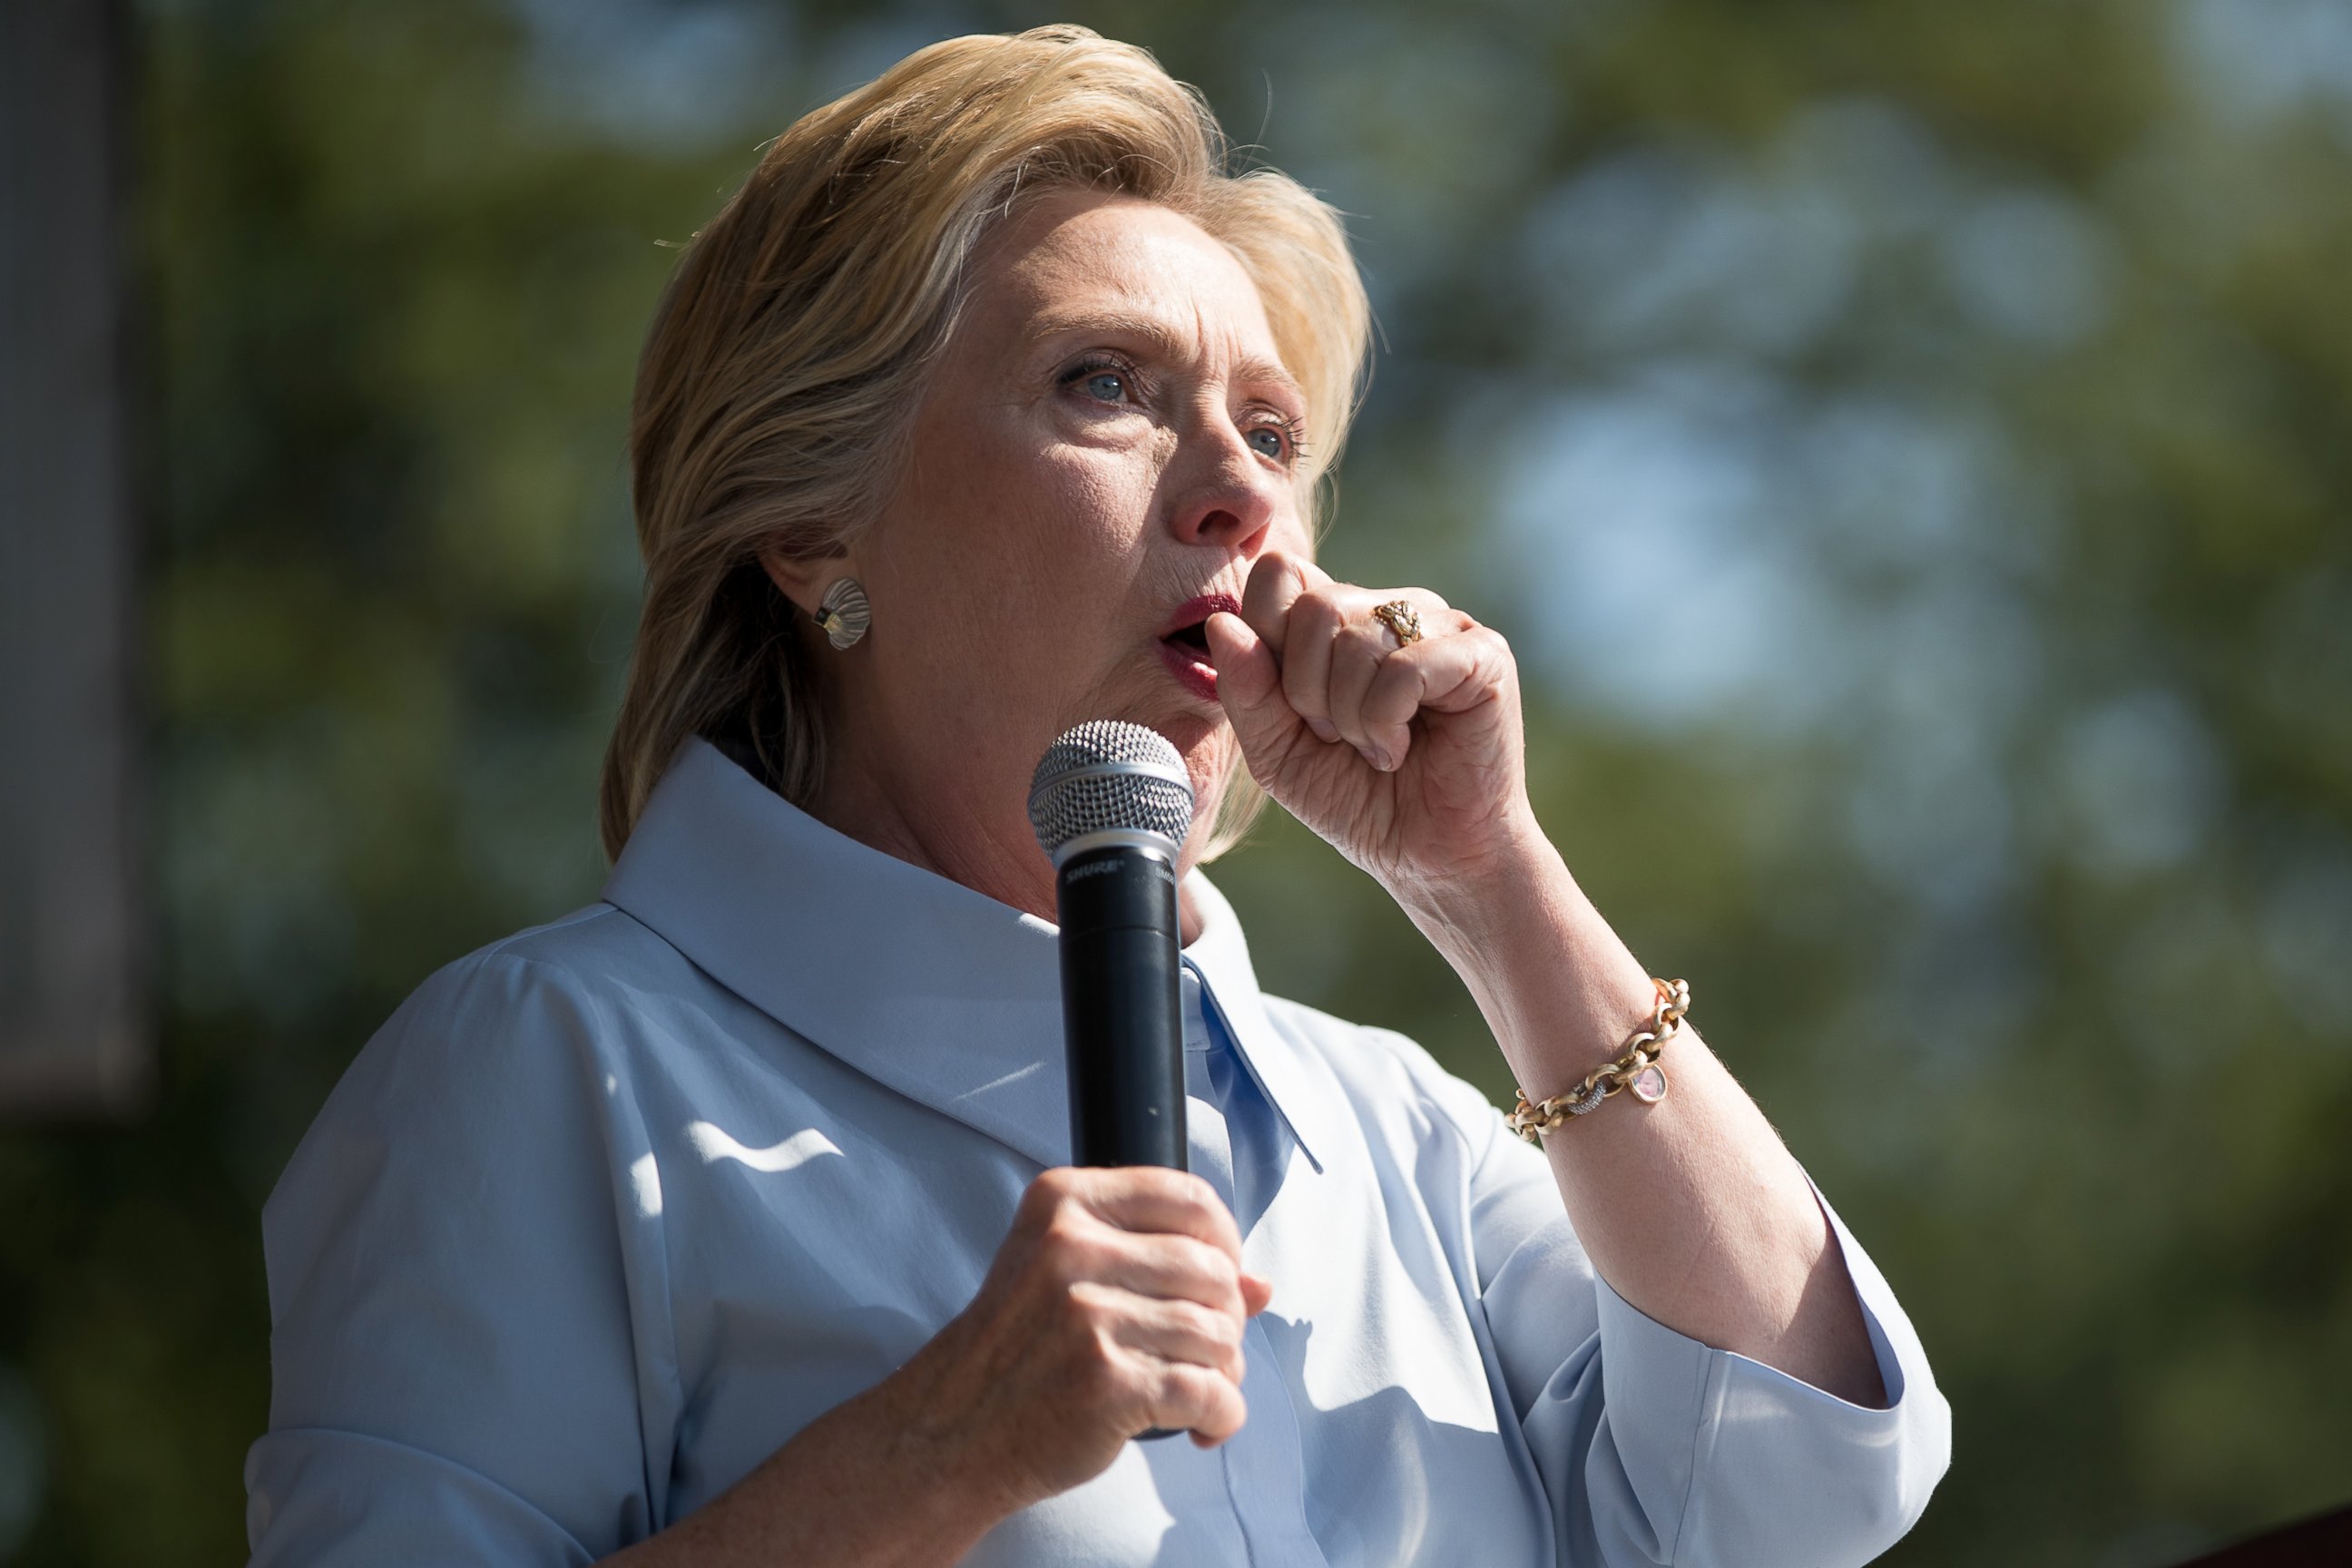 PHOTO: Democratic presidential candidate Hillary Clinton stops her speech to cough at the 11th Congressional District Labor Day festival at Luke Easter Park in Cleveland, Sept. 5, 2016.